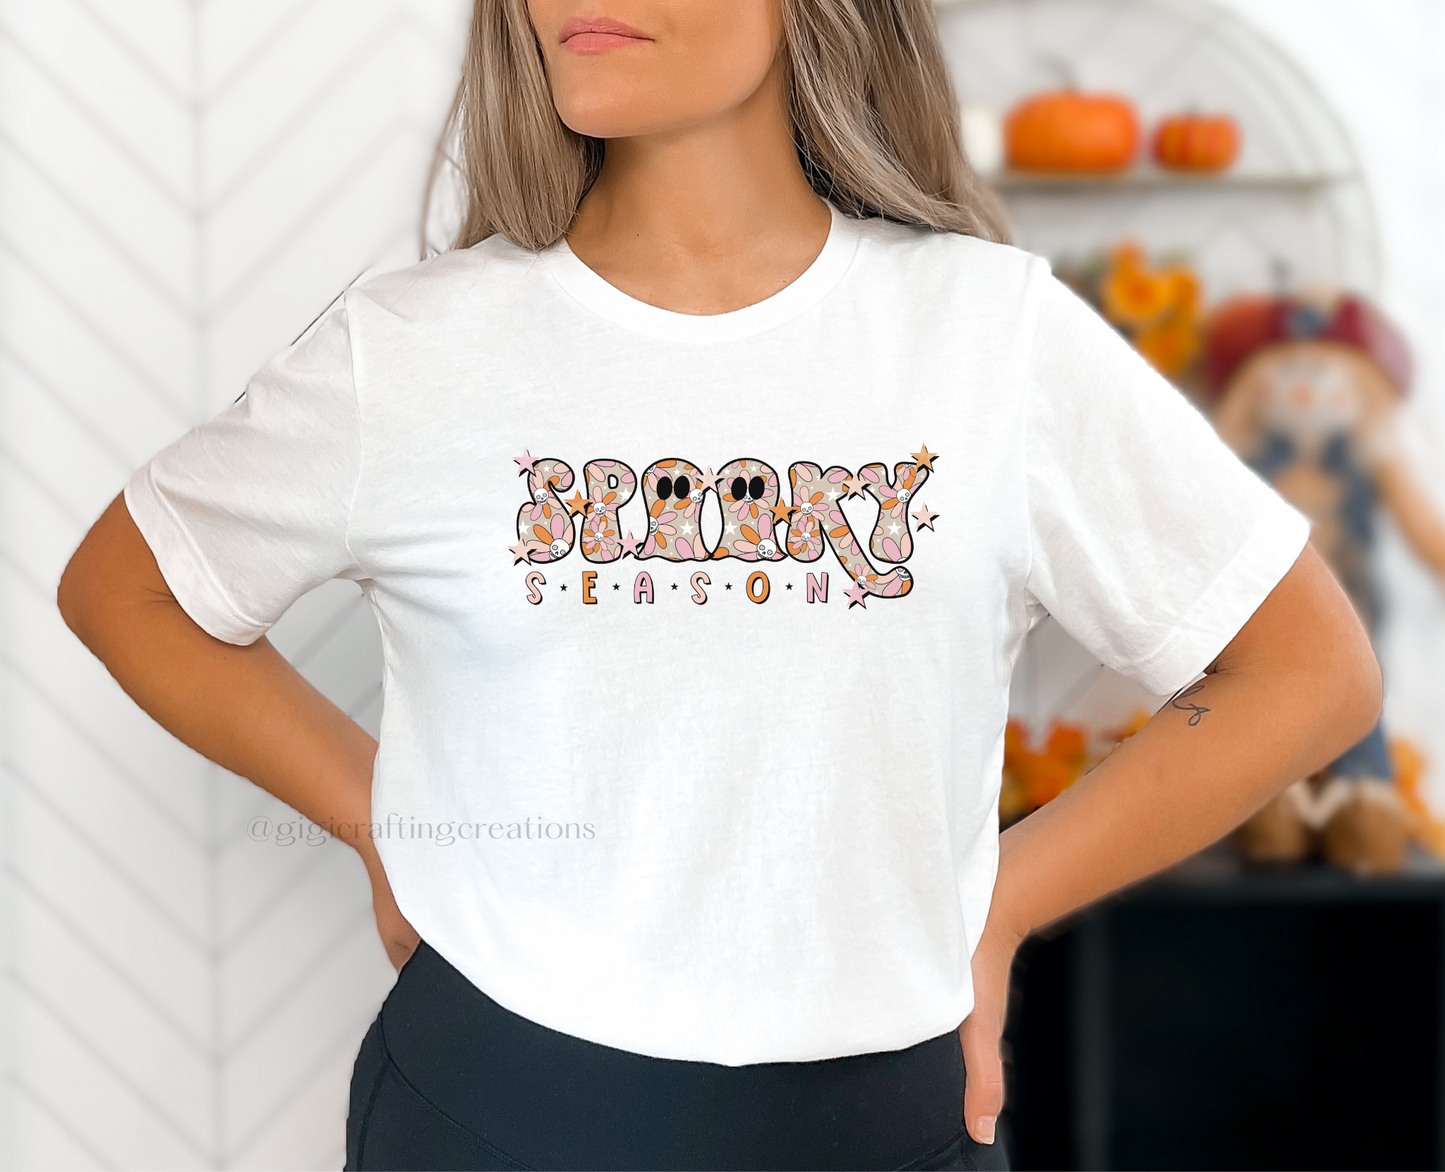 Spooky Season Colorful Relaxed Unisex T-shirt